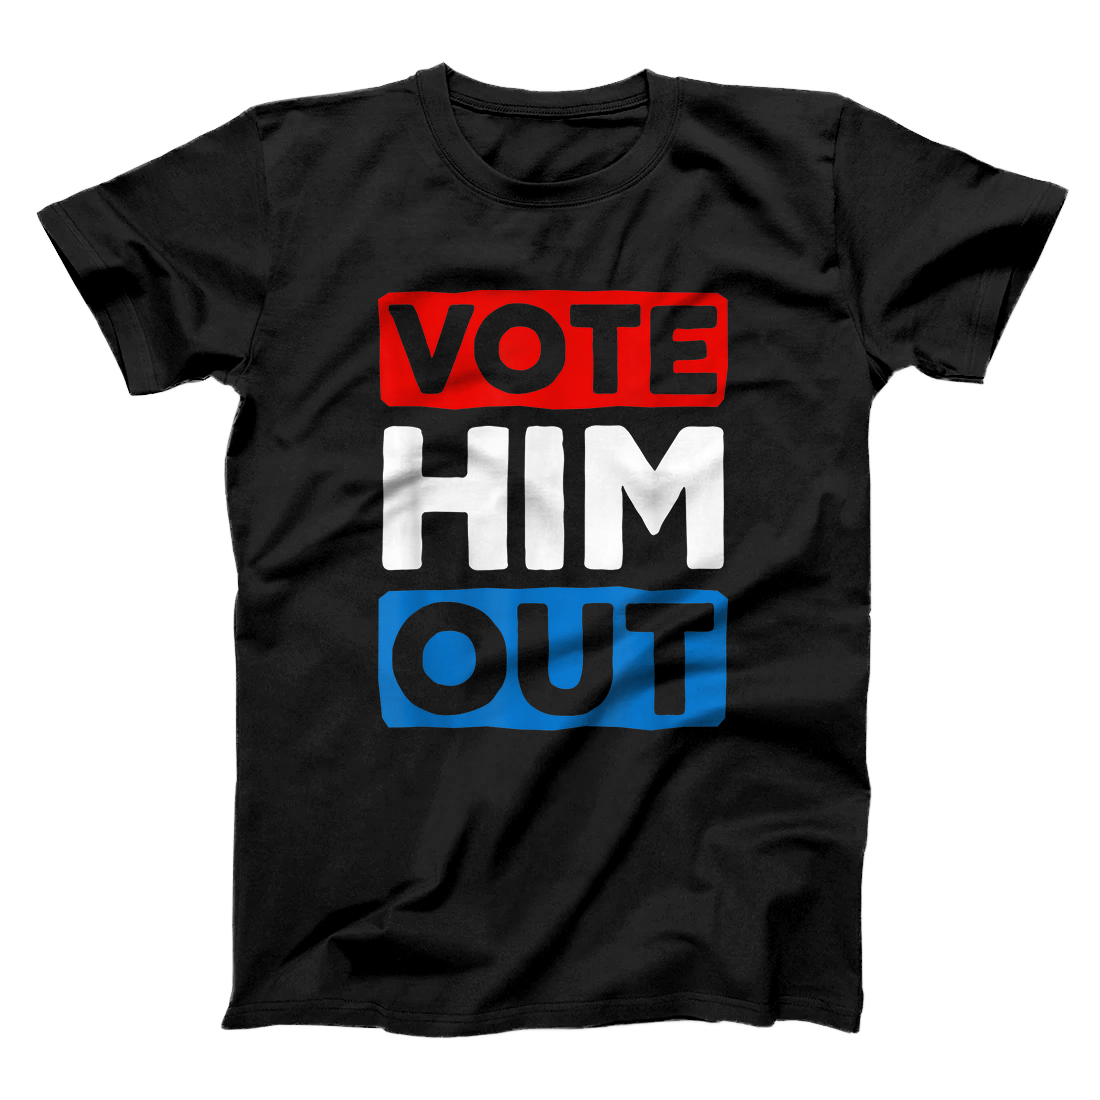 Personalized Vote Him Out Shirt Nov 3rd 2020 Presidential Election Voting T-Shirt